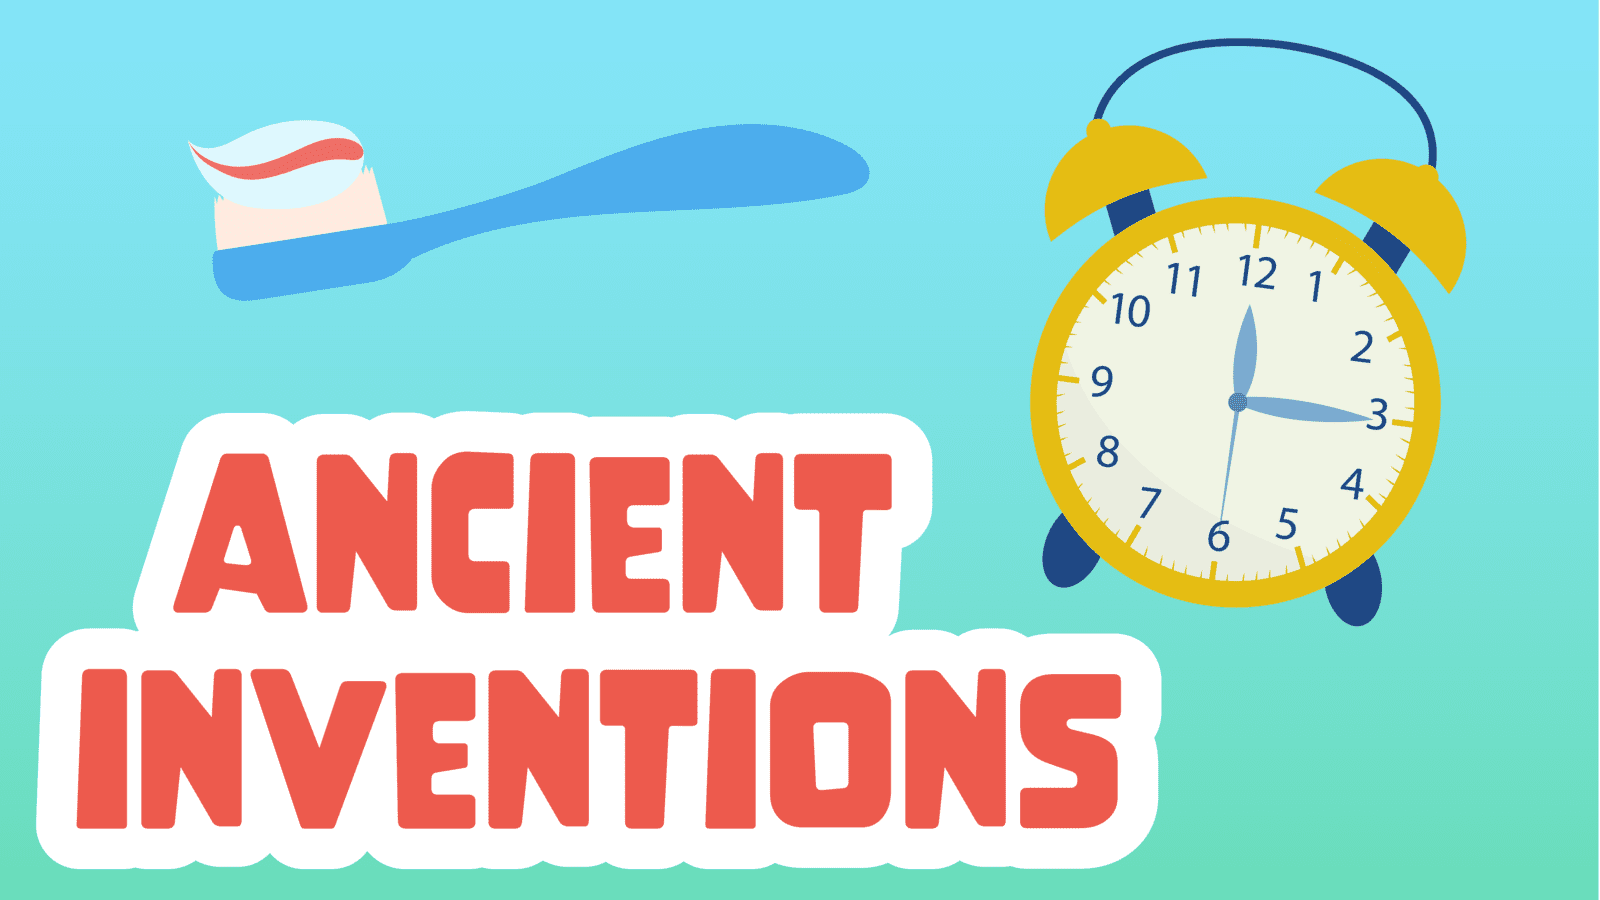 Ancient Inventions Facts for Kids – 5 Astonishing Facts about Ancient Inventions